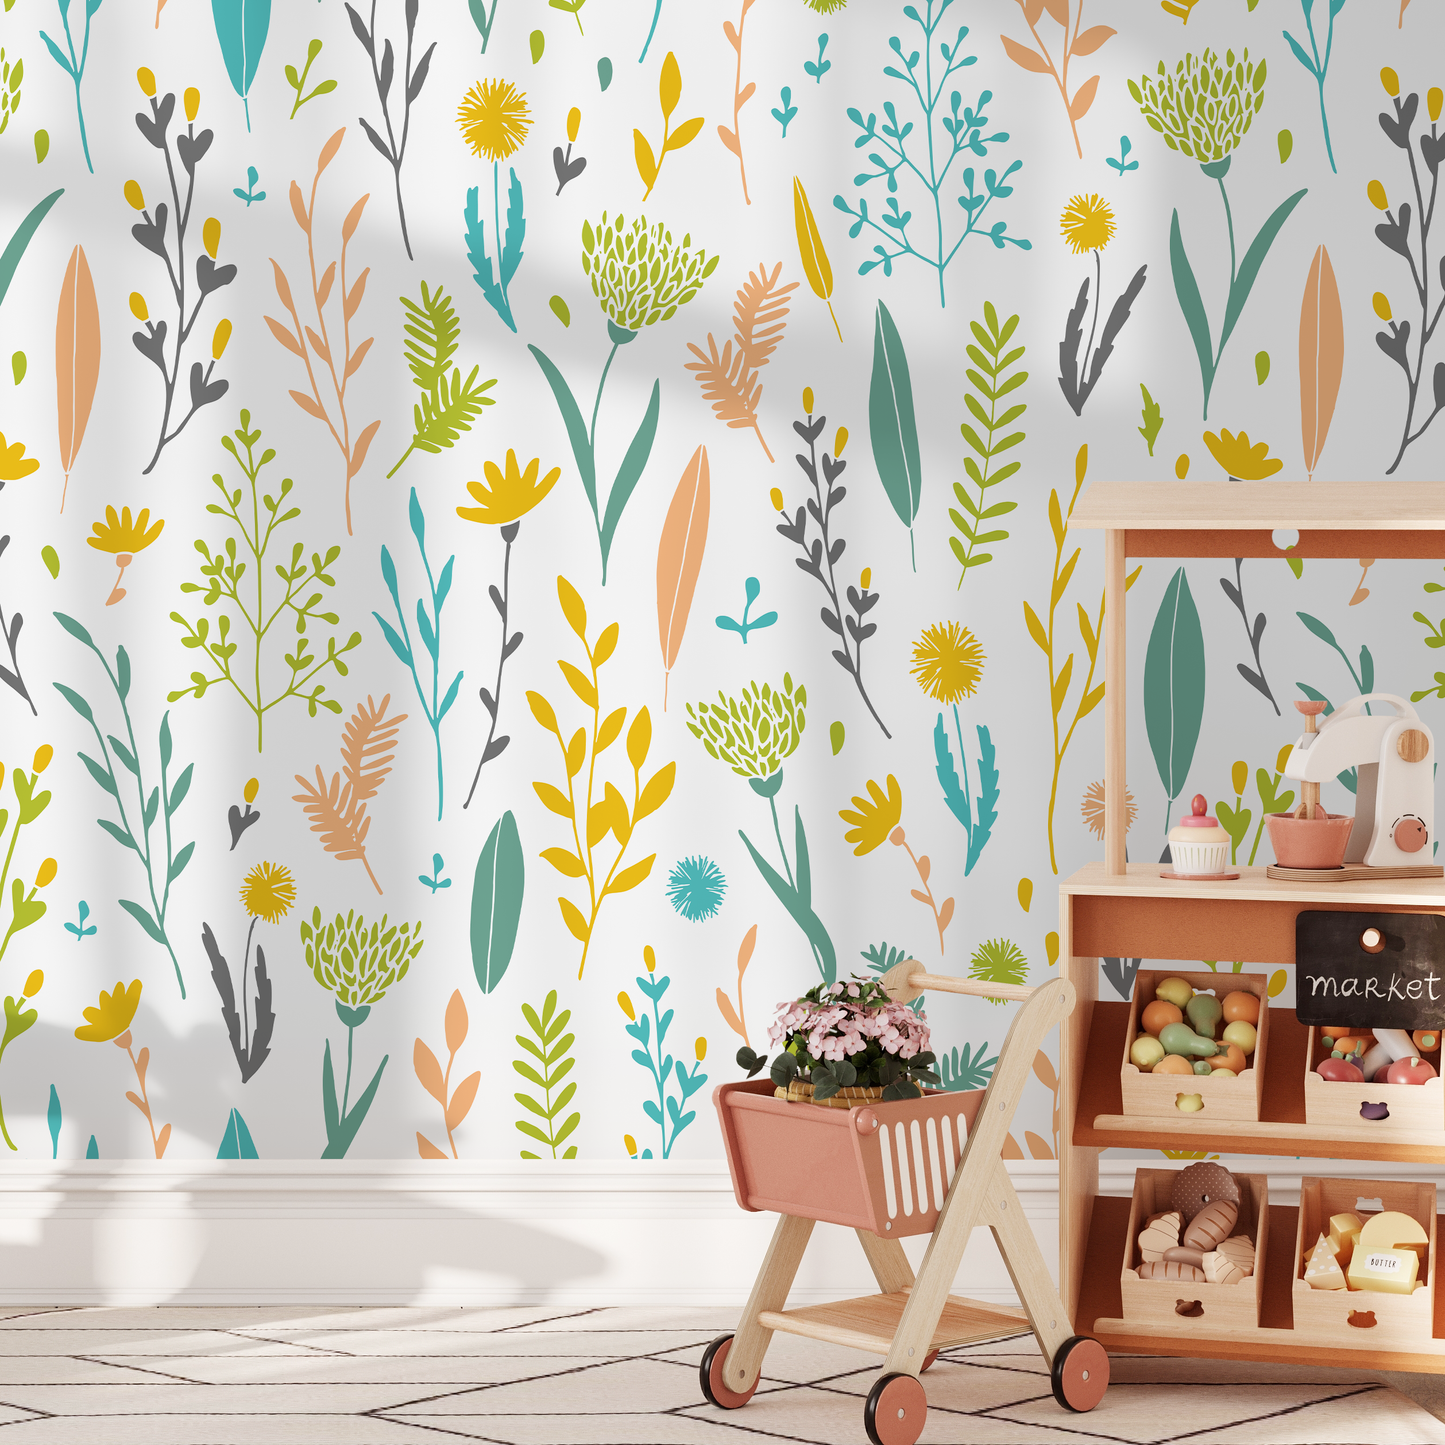 Removable Wallpaper Peel and Stick Wallpaper Wall Paper Wall Mural - Vintage Floral Wallpaper  - A881